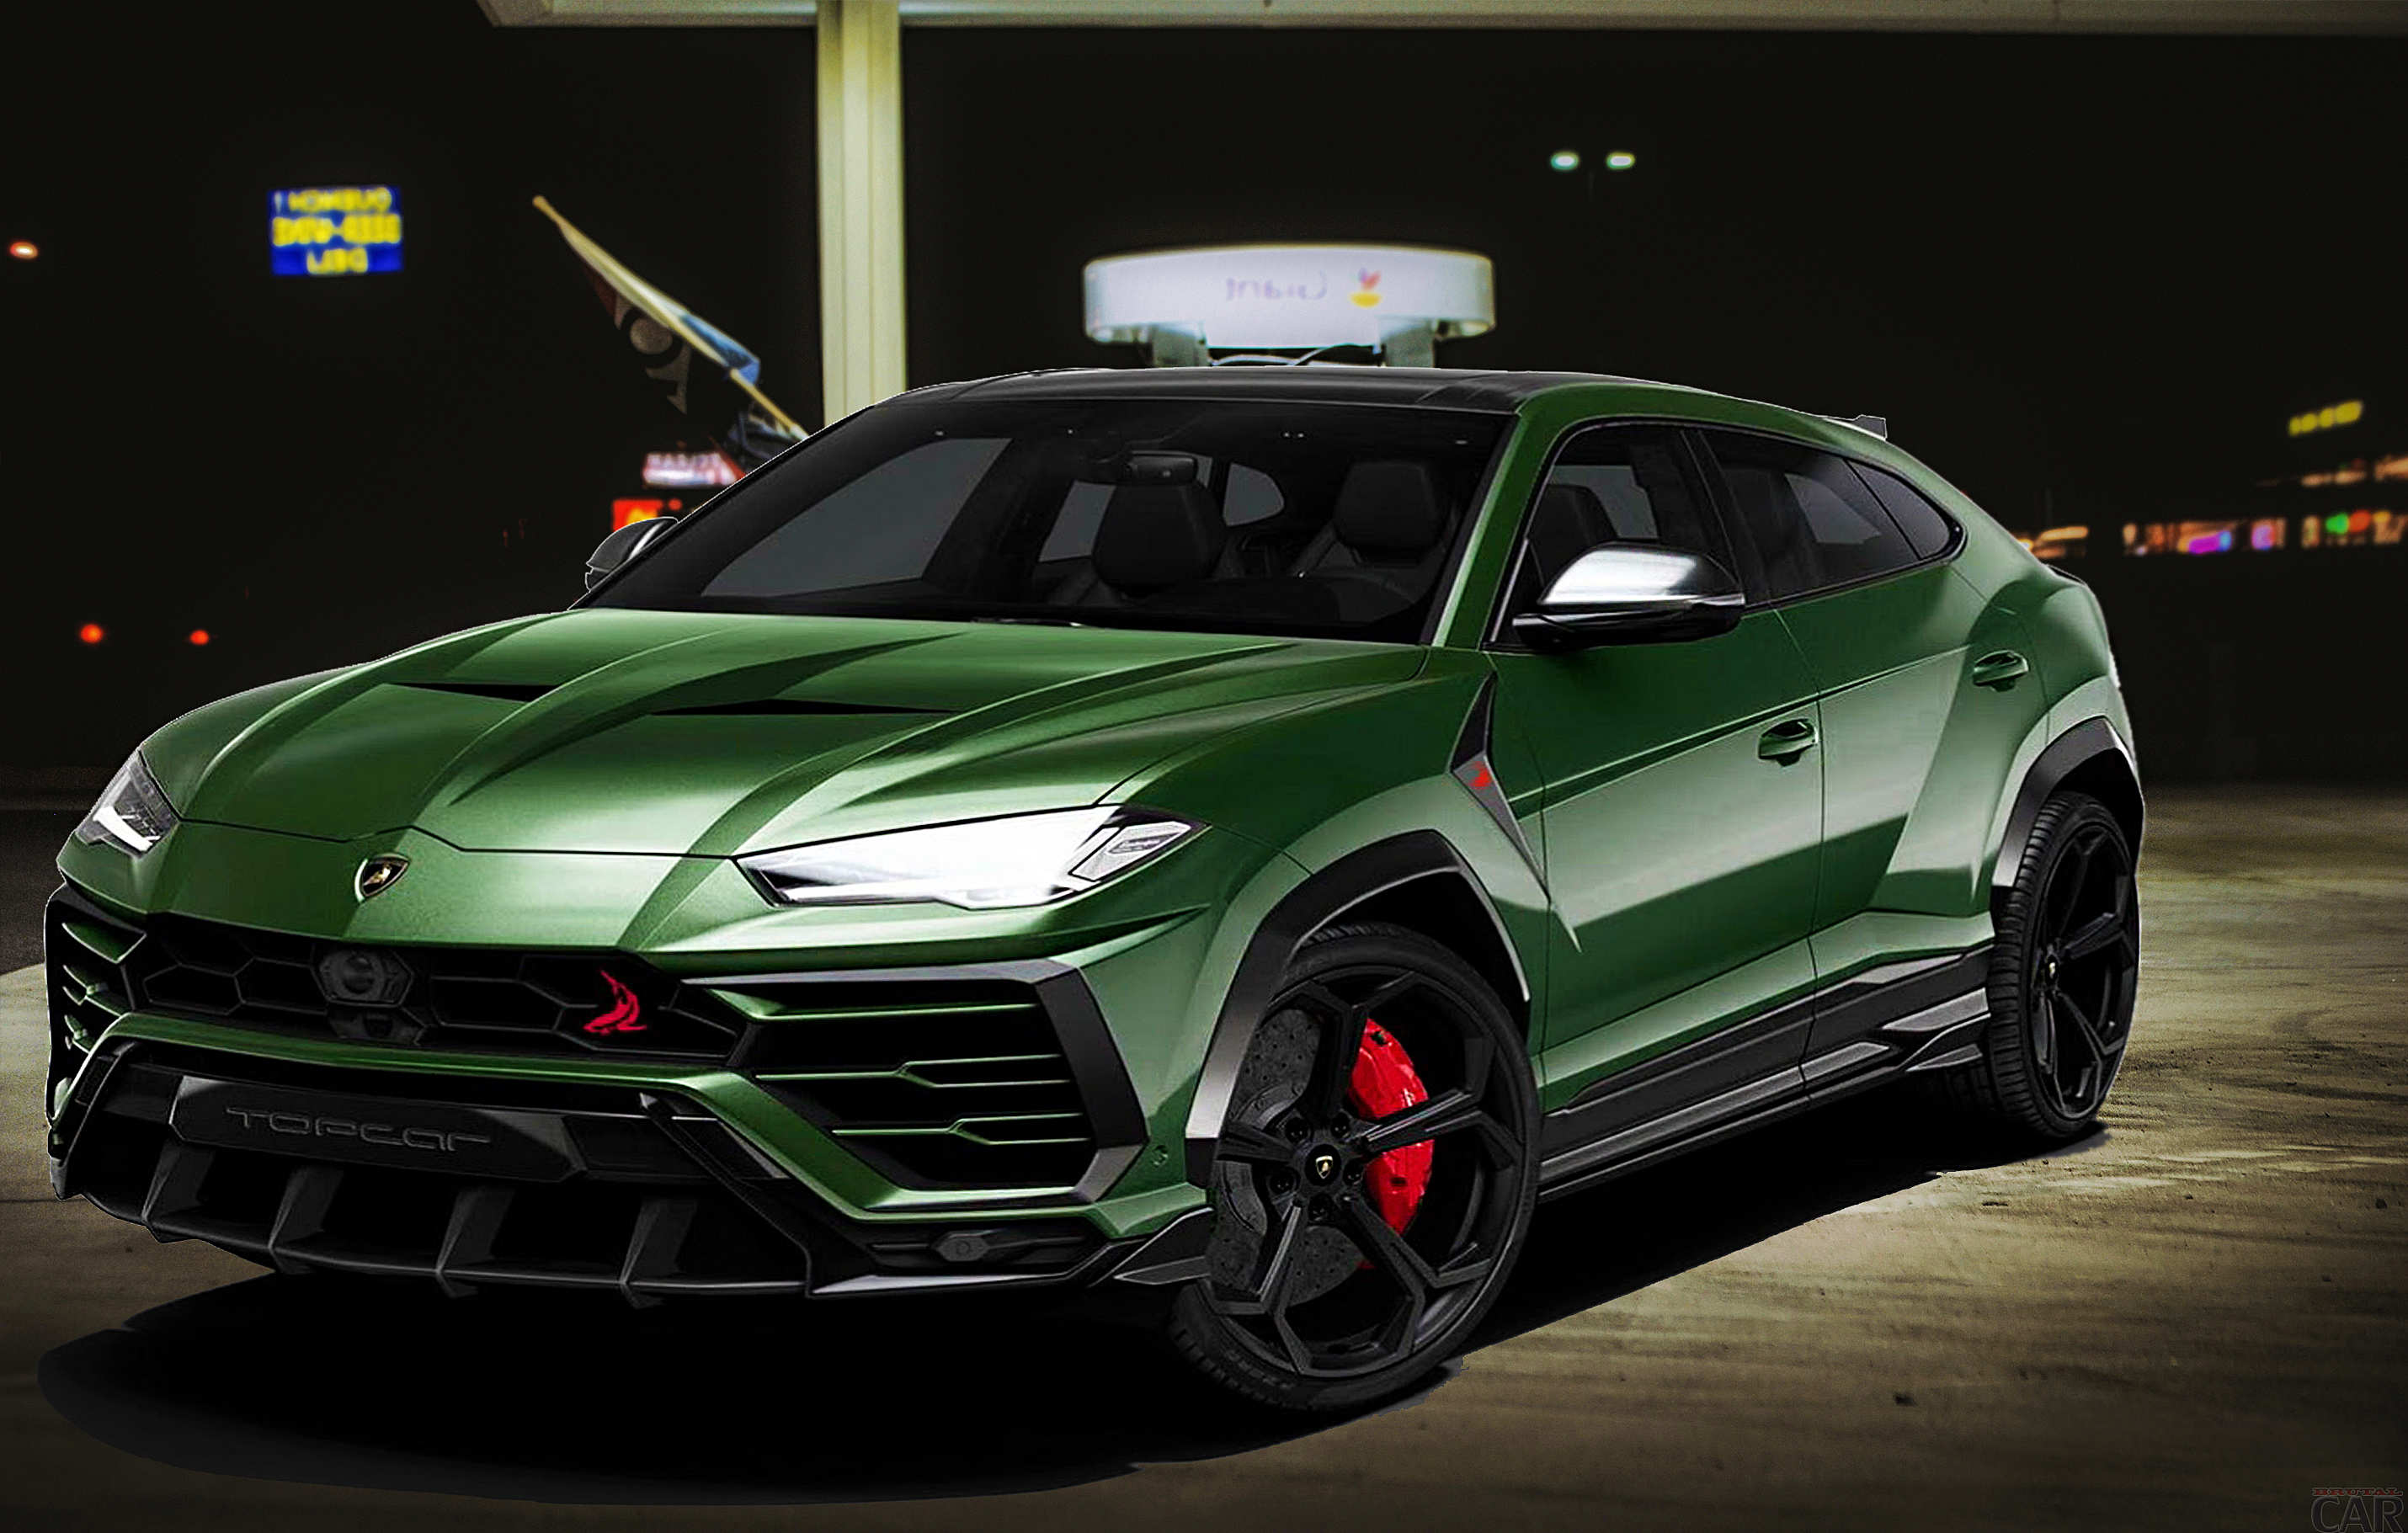 Lamborghini Urus wallpaper HD download for free. Watch for free the best HD photo of cool cars